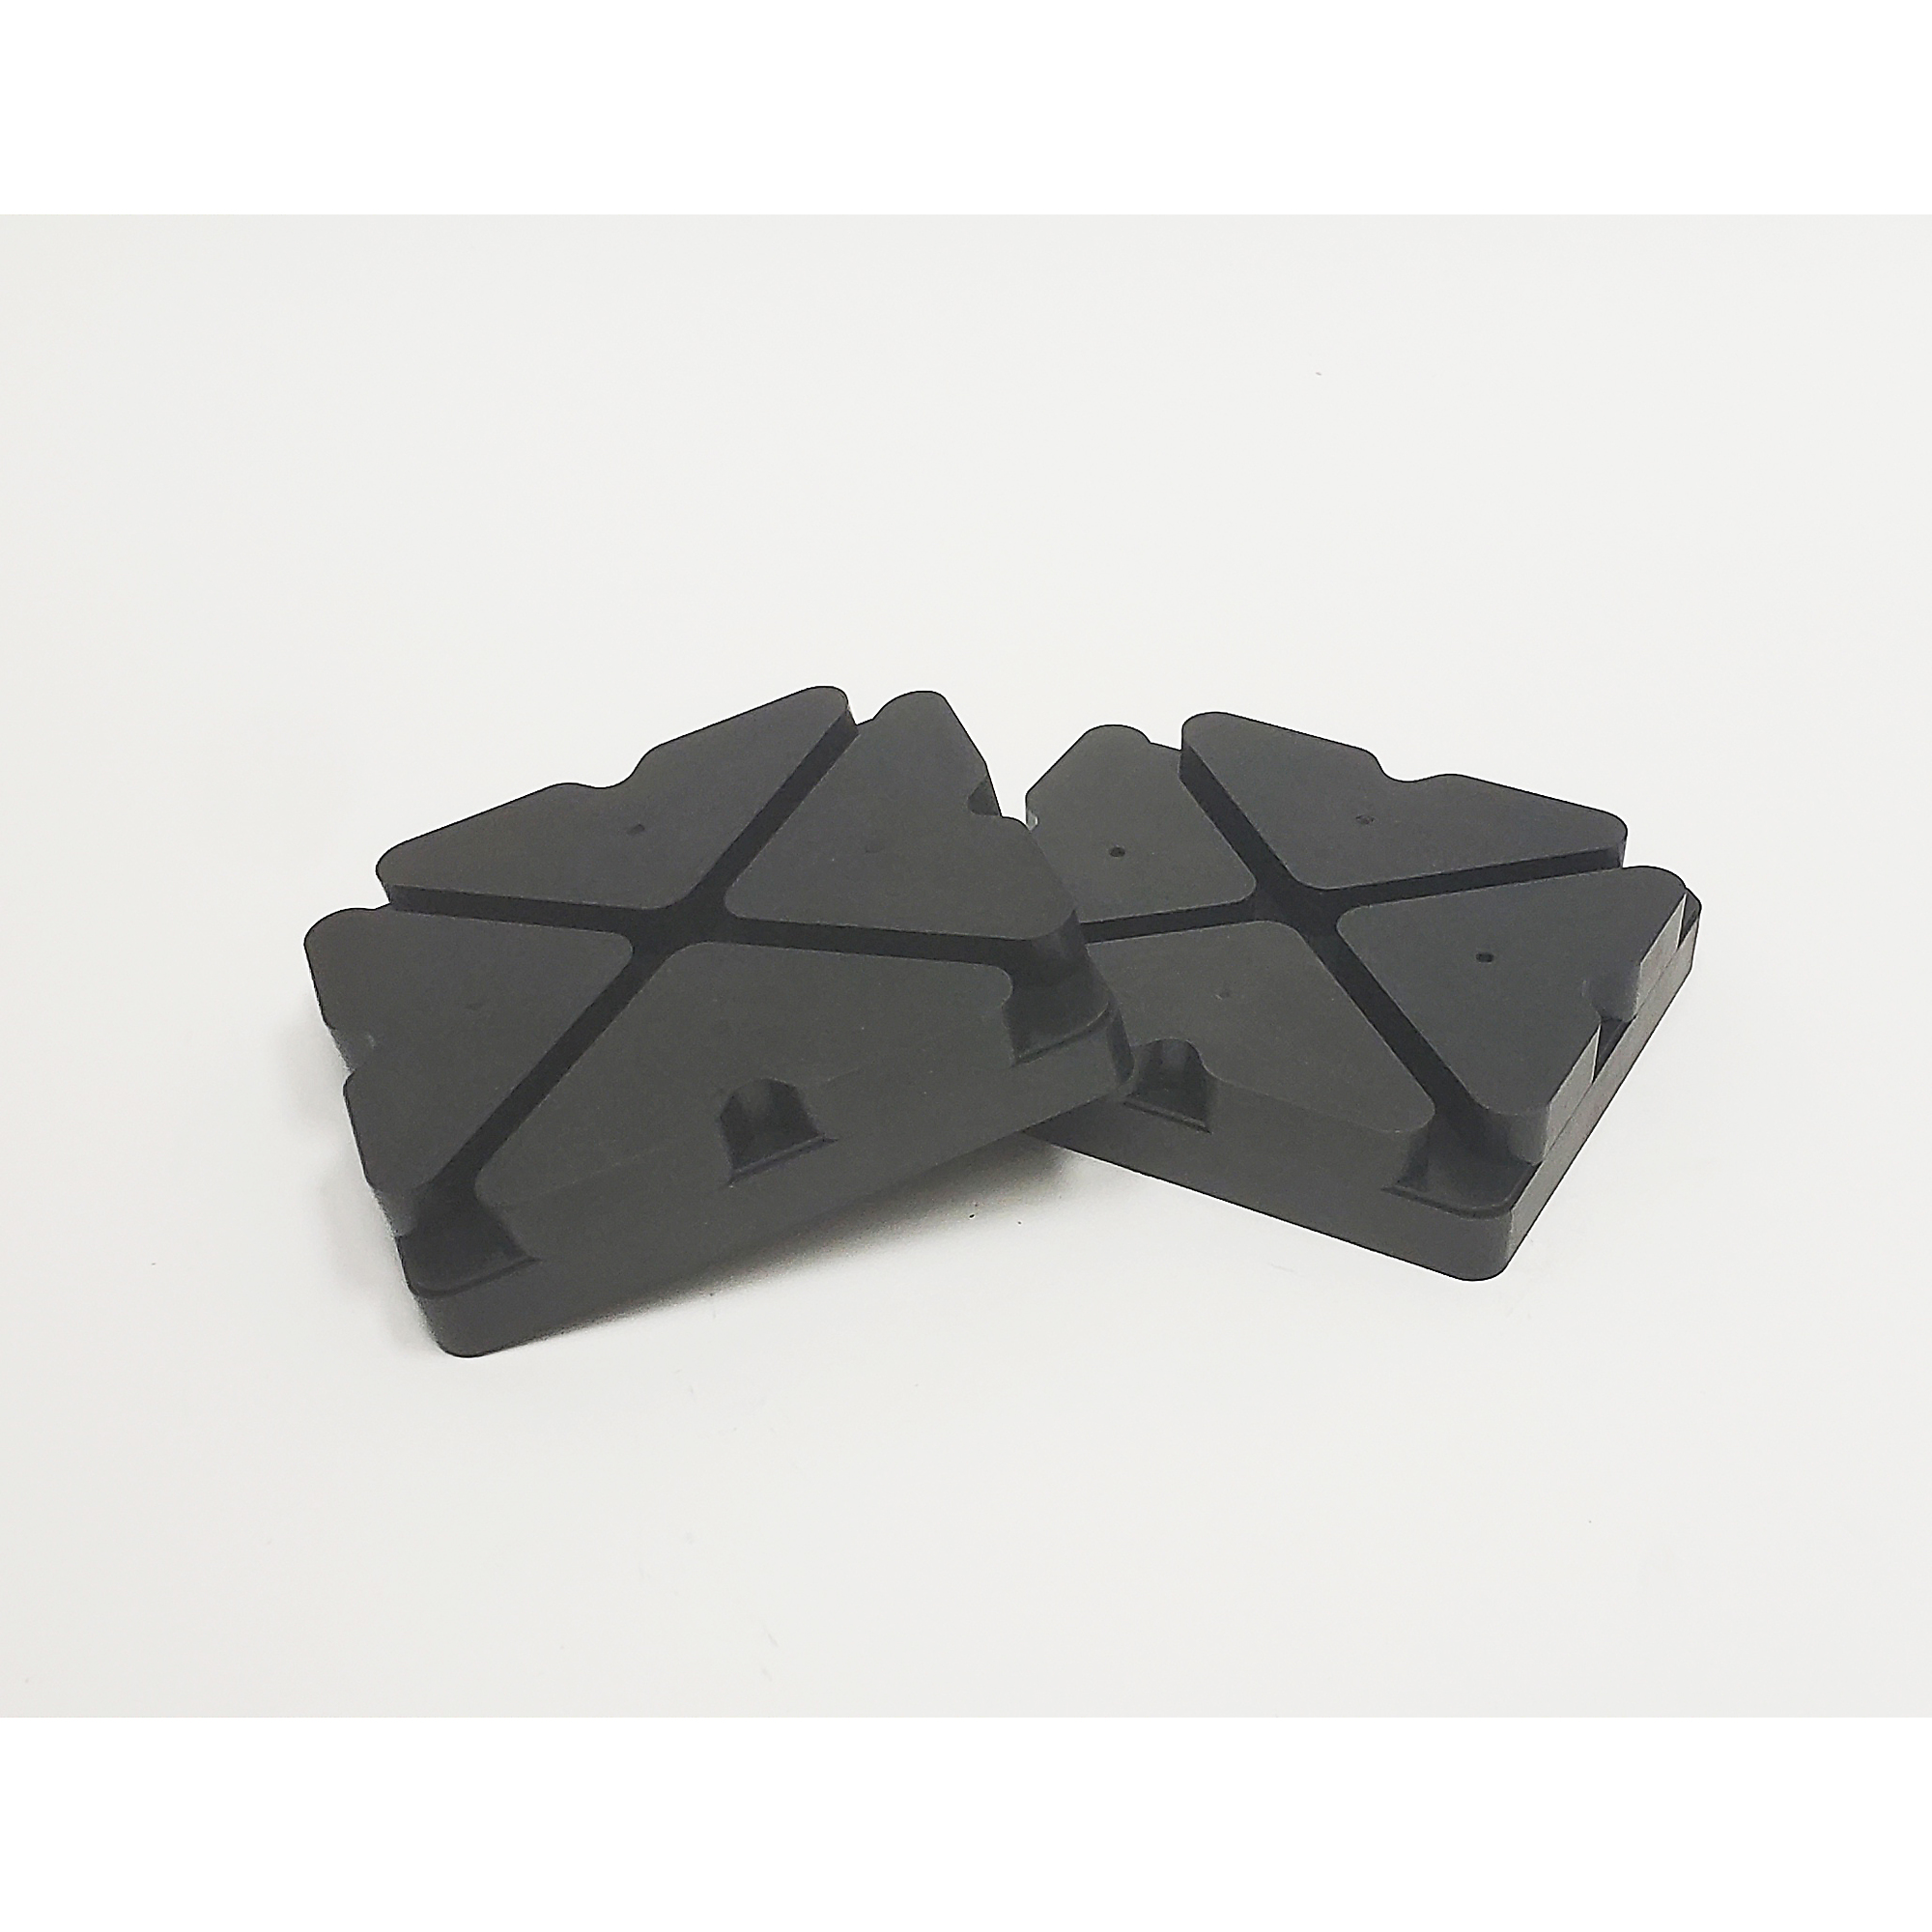 Stan Design, Moulded Rubber Pad Cover (1Pair), Capacity 9000 lb, Included (qty.) 2 Model 6455